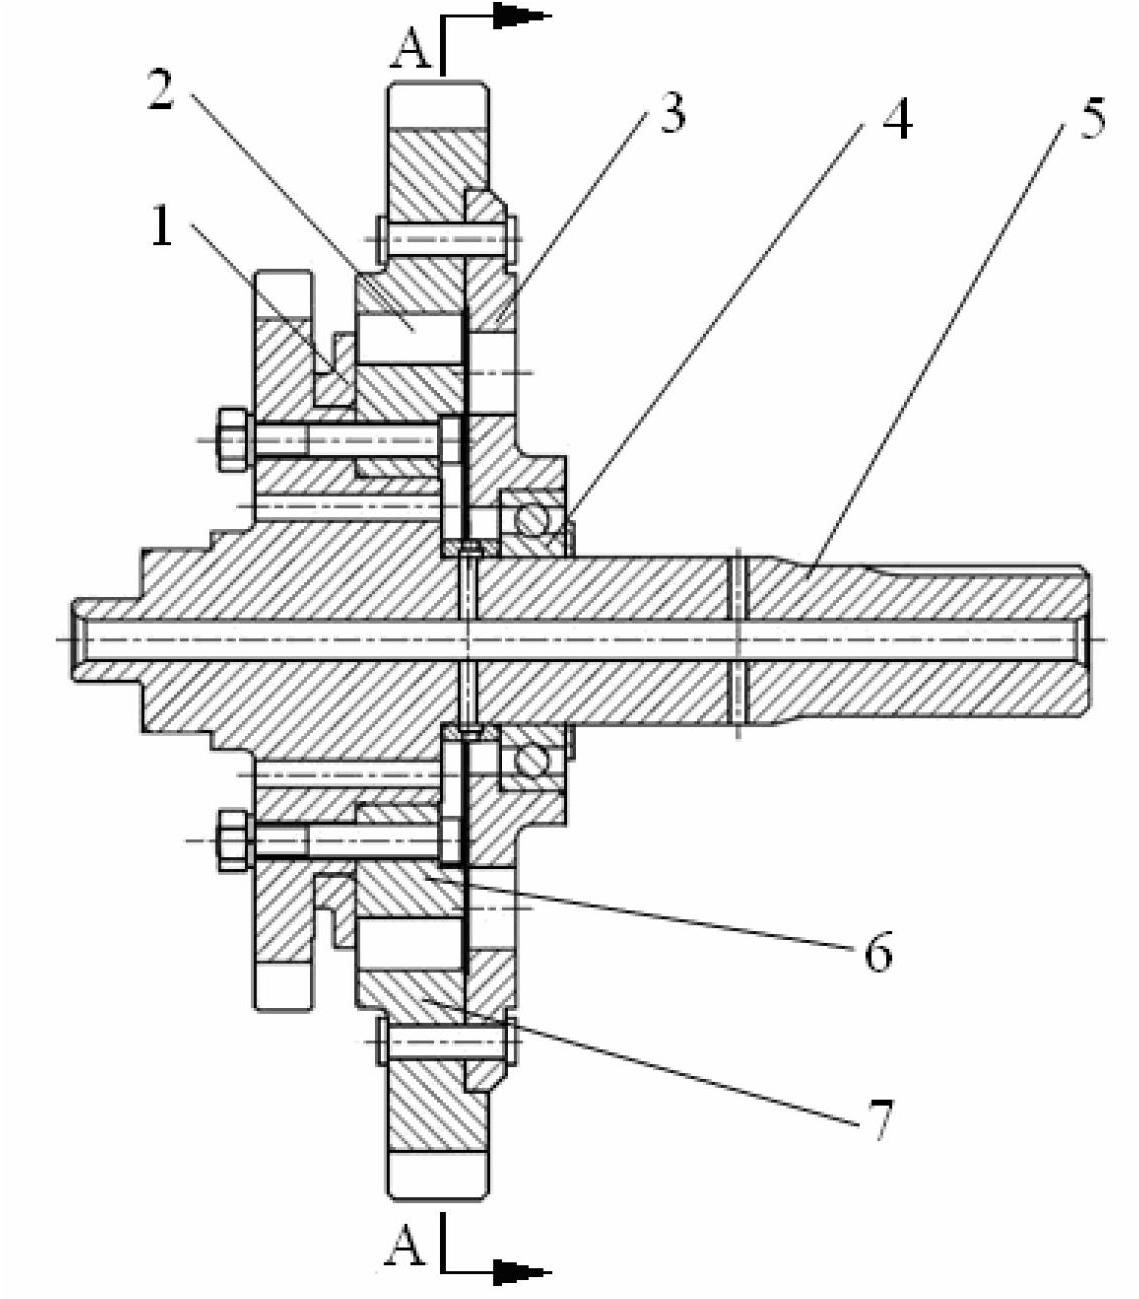 Overrunning clutch for confluence mechanism of double-turbine hydraulic torque converter